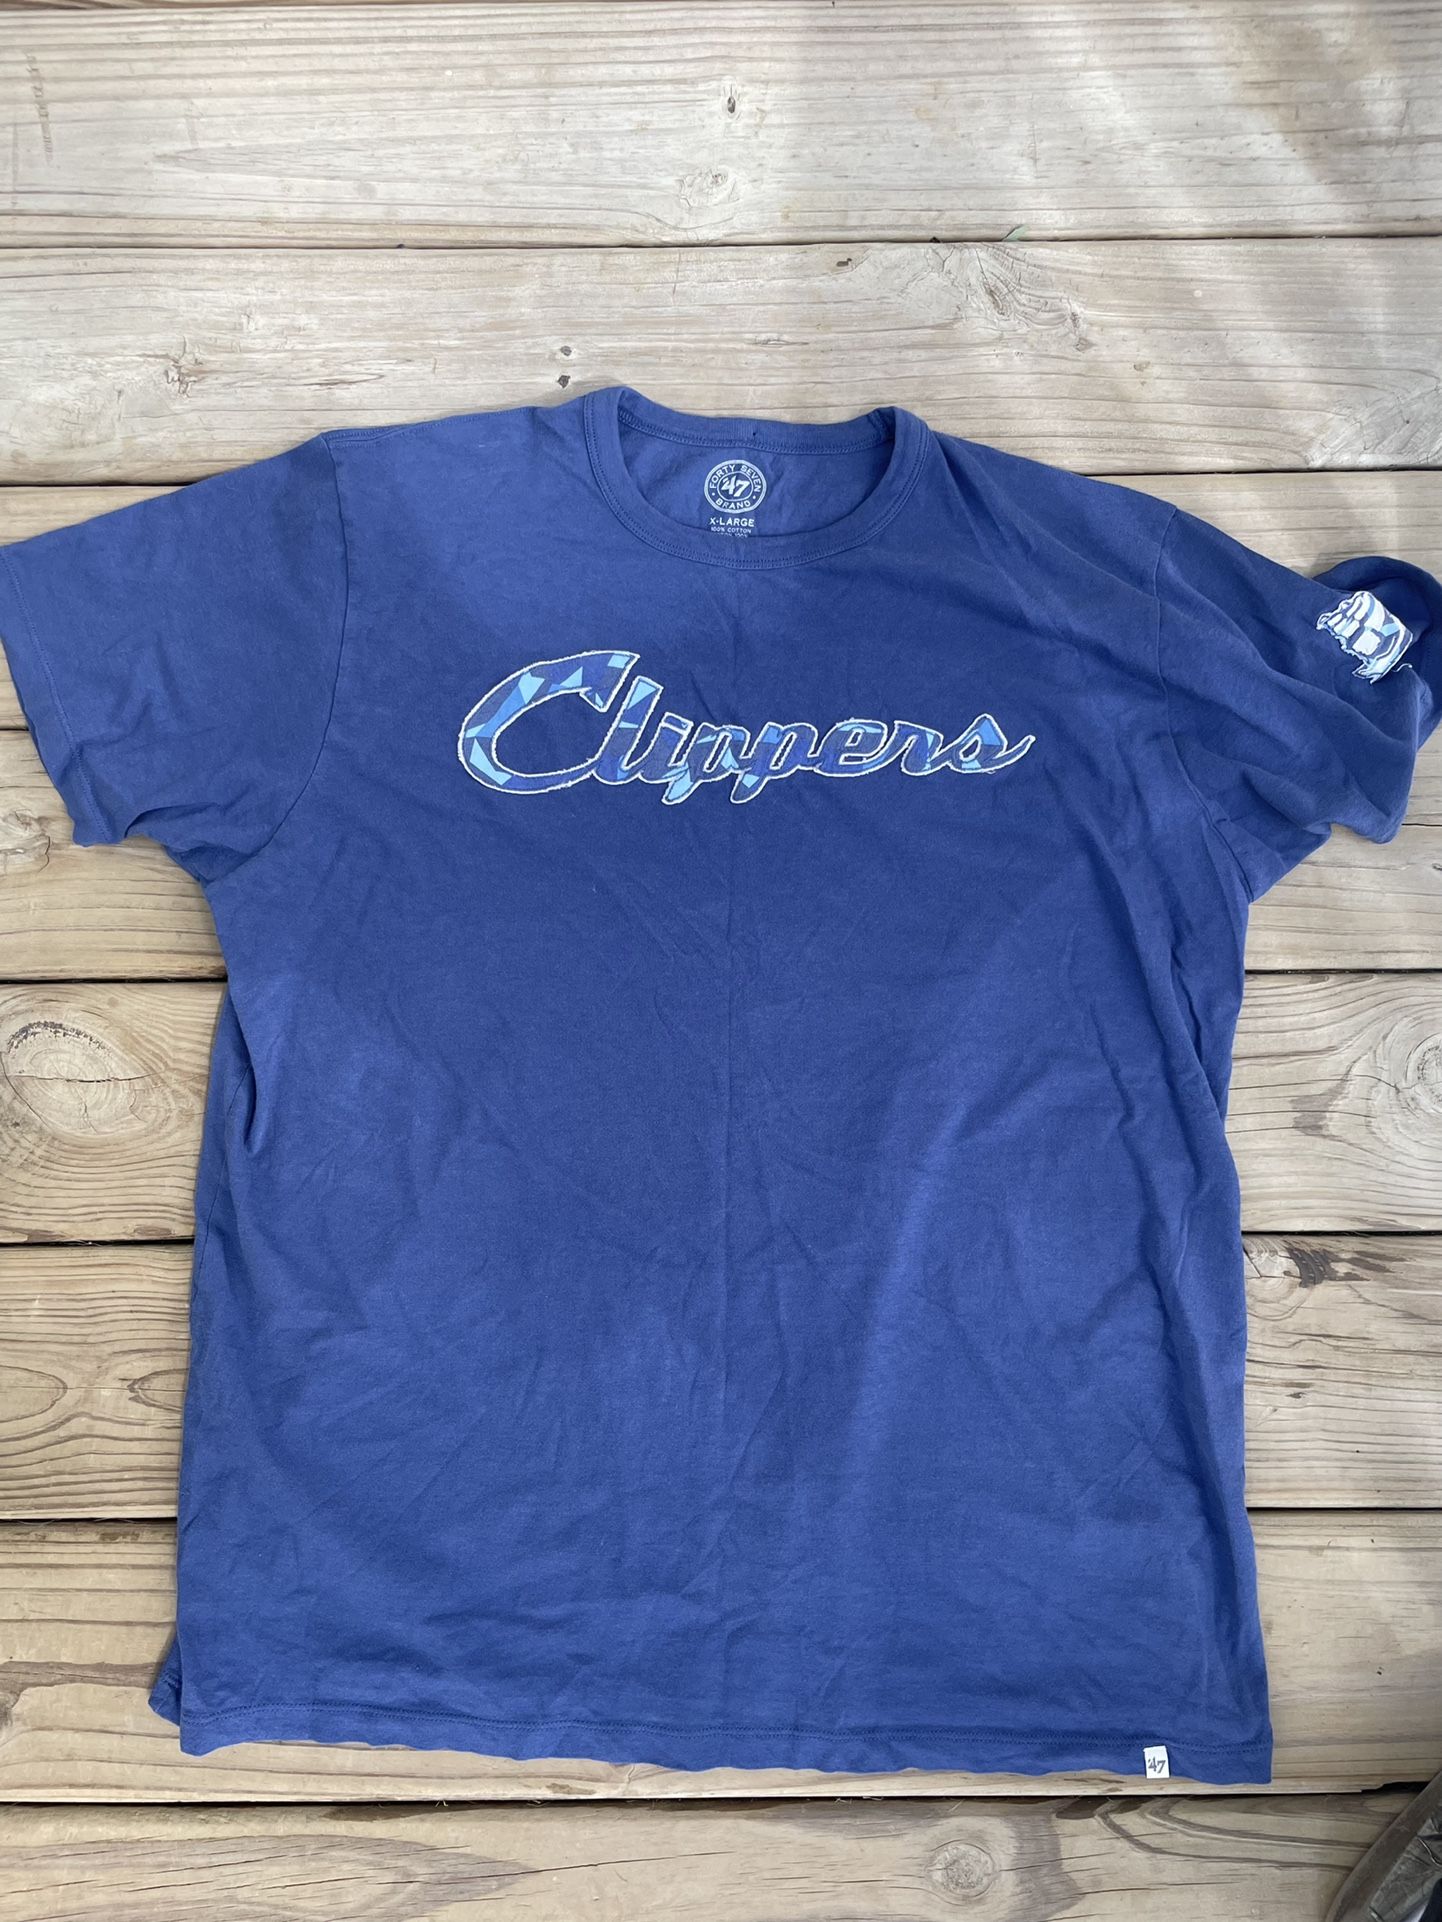 Columbus clippers tee